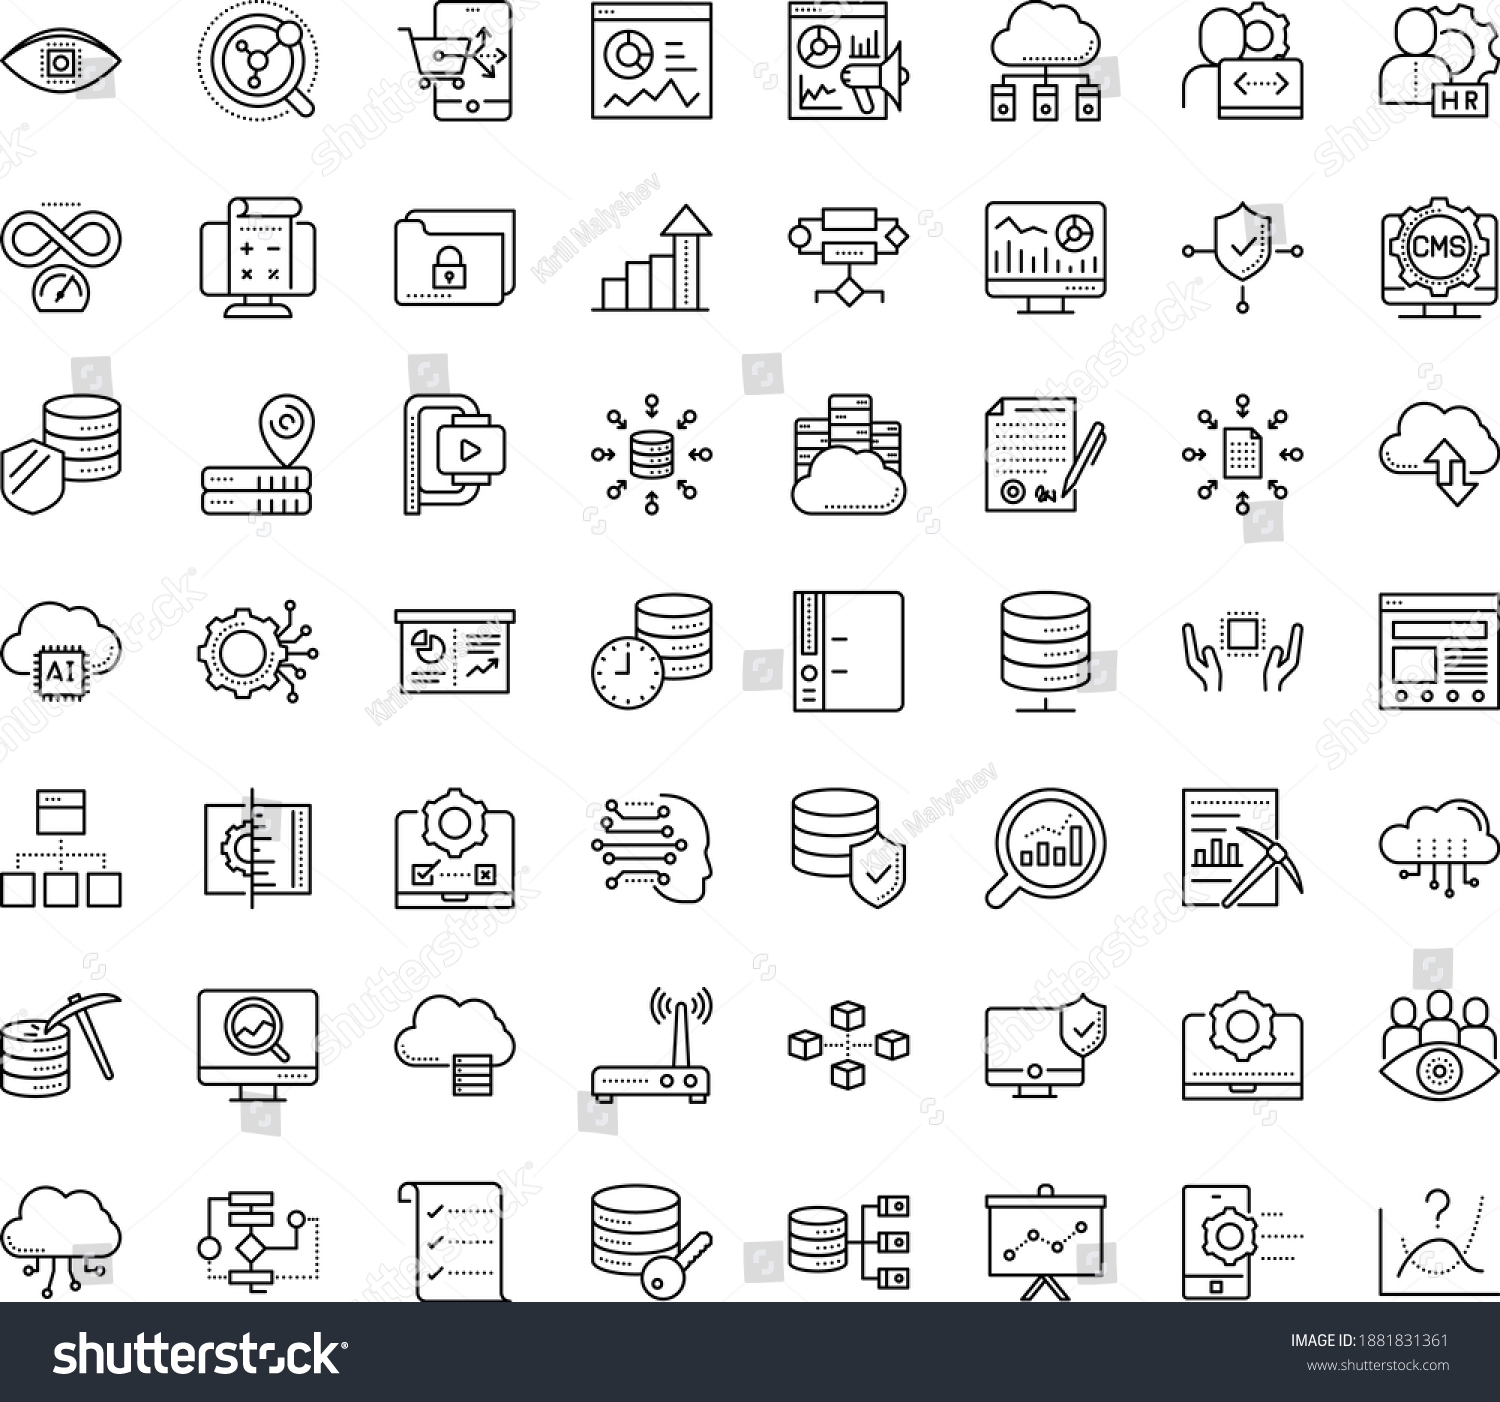 Thin outline vector icon set with dots - growth vector, hr manager, Web analytics, SEO monitoring, Marketing, Business Planning, Machine learning, Algorithm, Data mining, Computer Vision, Folder #1881831361